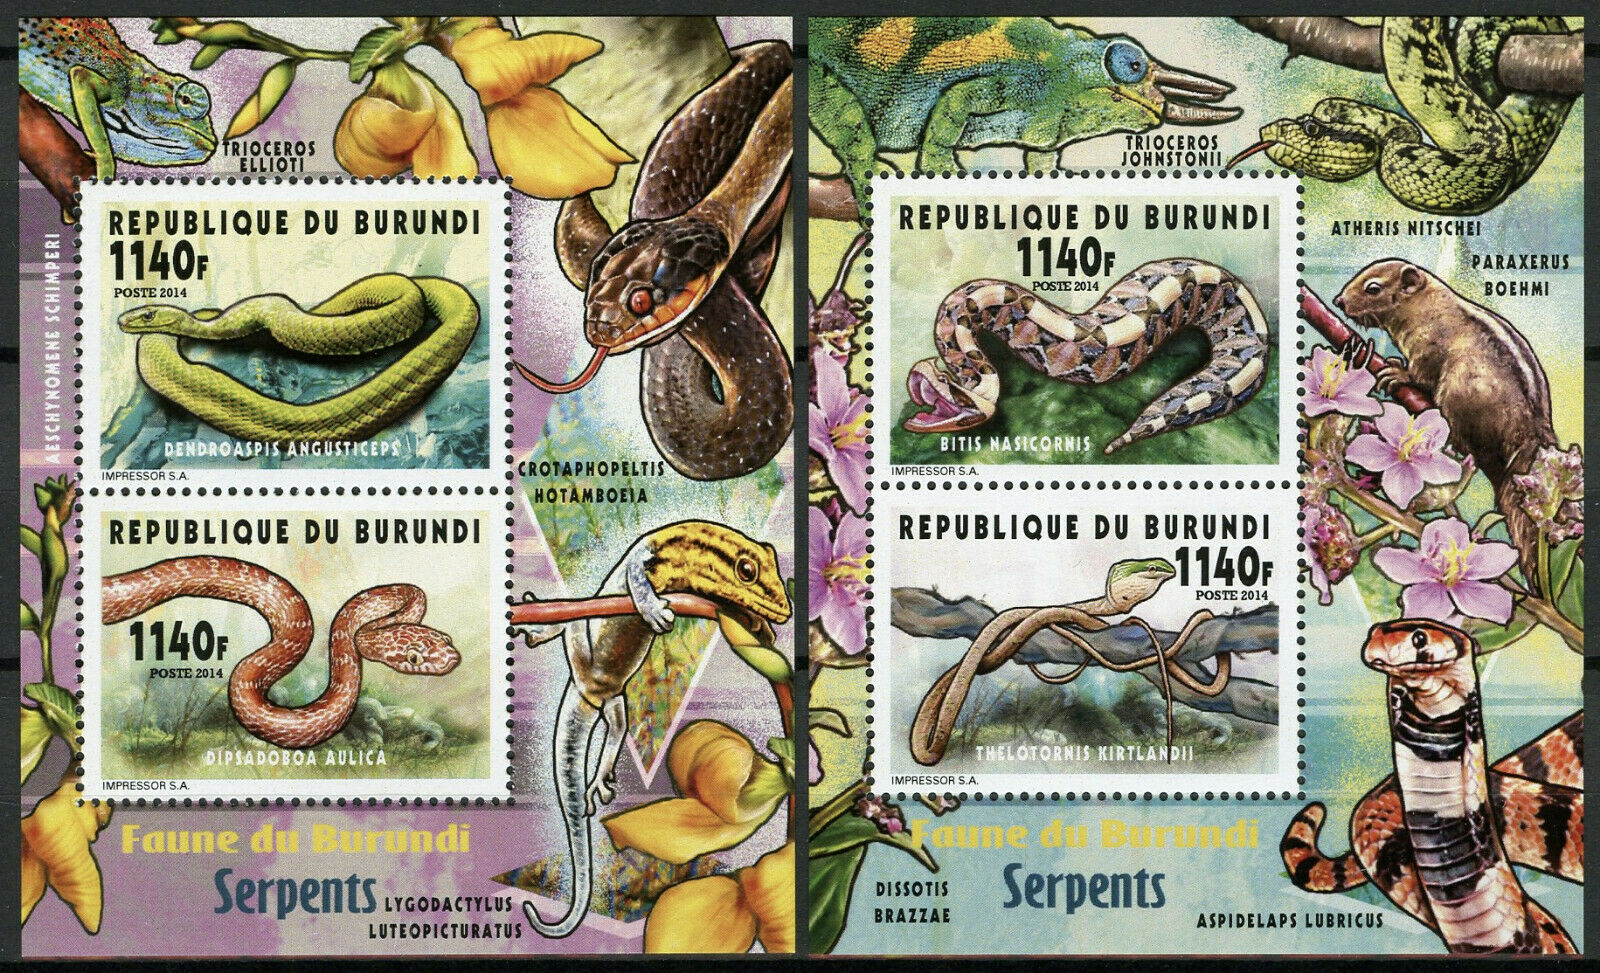 Burundi 2014 MNH Fauna Snakes 2x 2v Deluxe M/S Reptiles Stamps